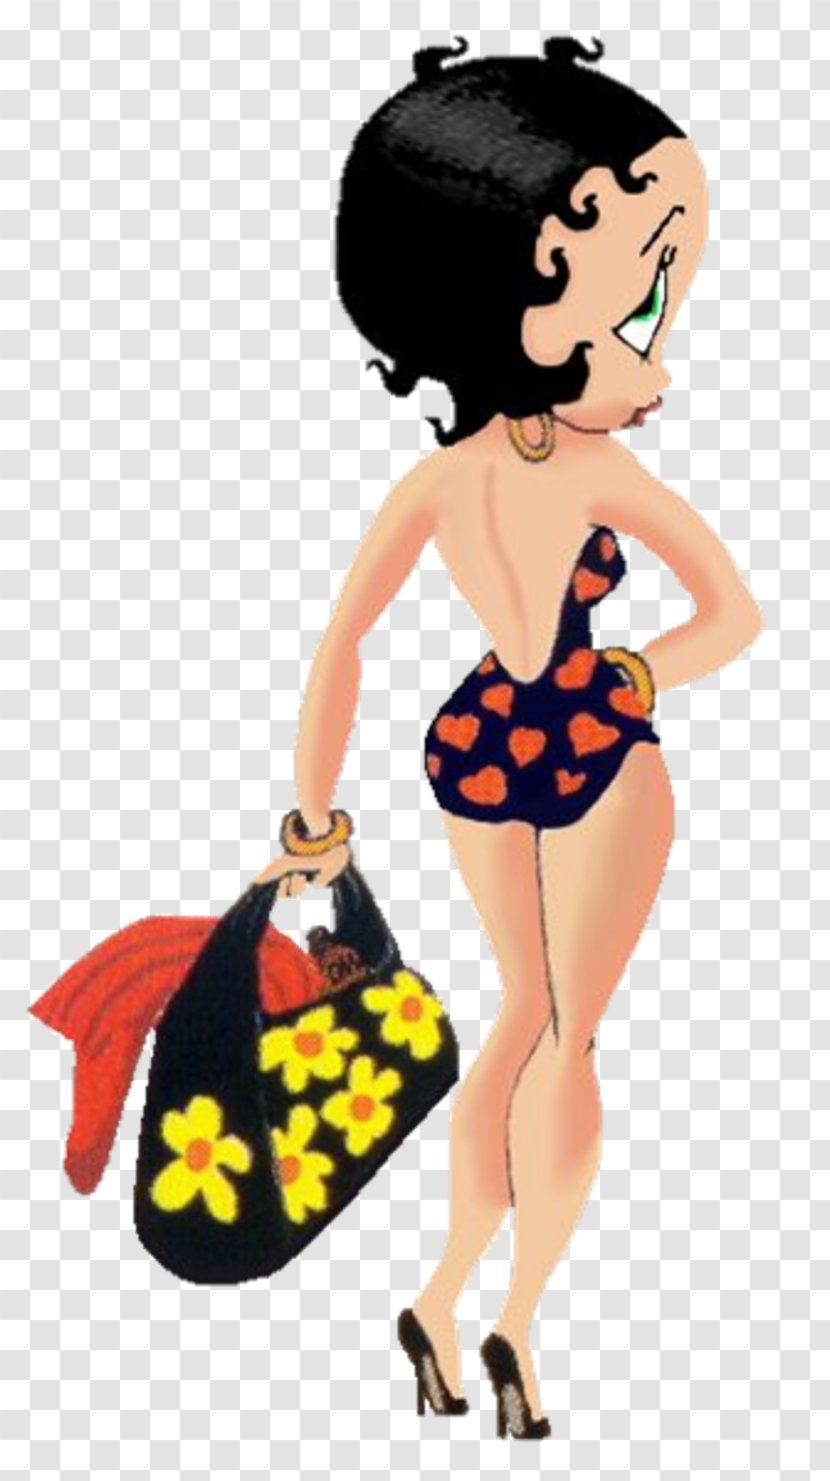 Betty Boop Animated Film Cartoon Drawing - Frame Transparent PNG